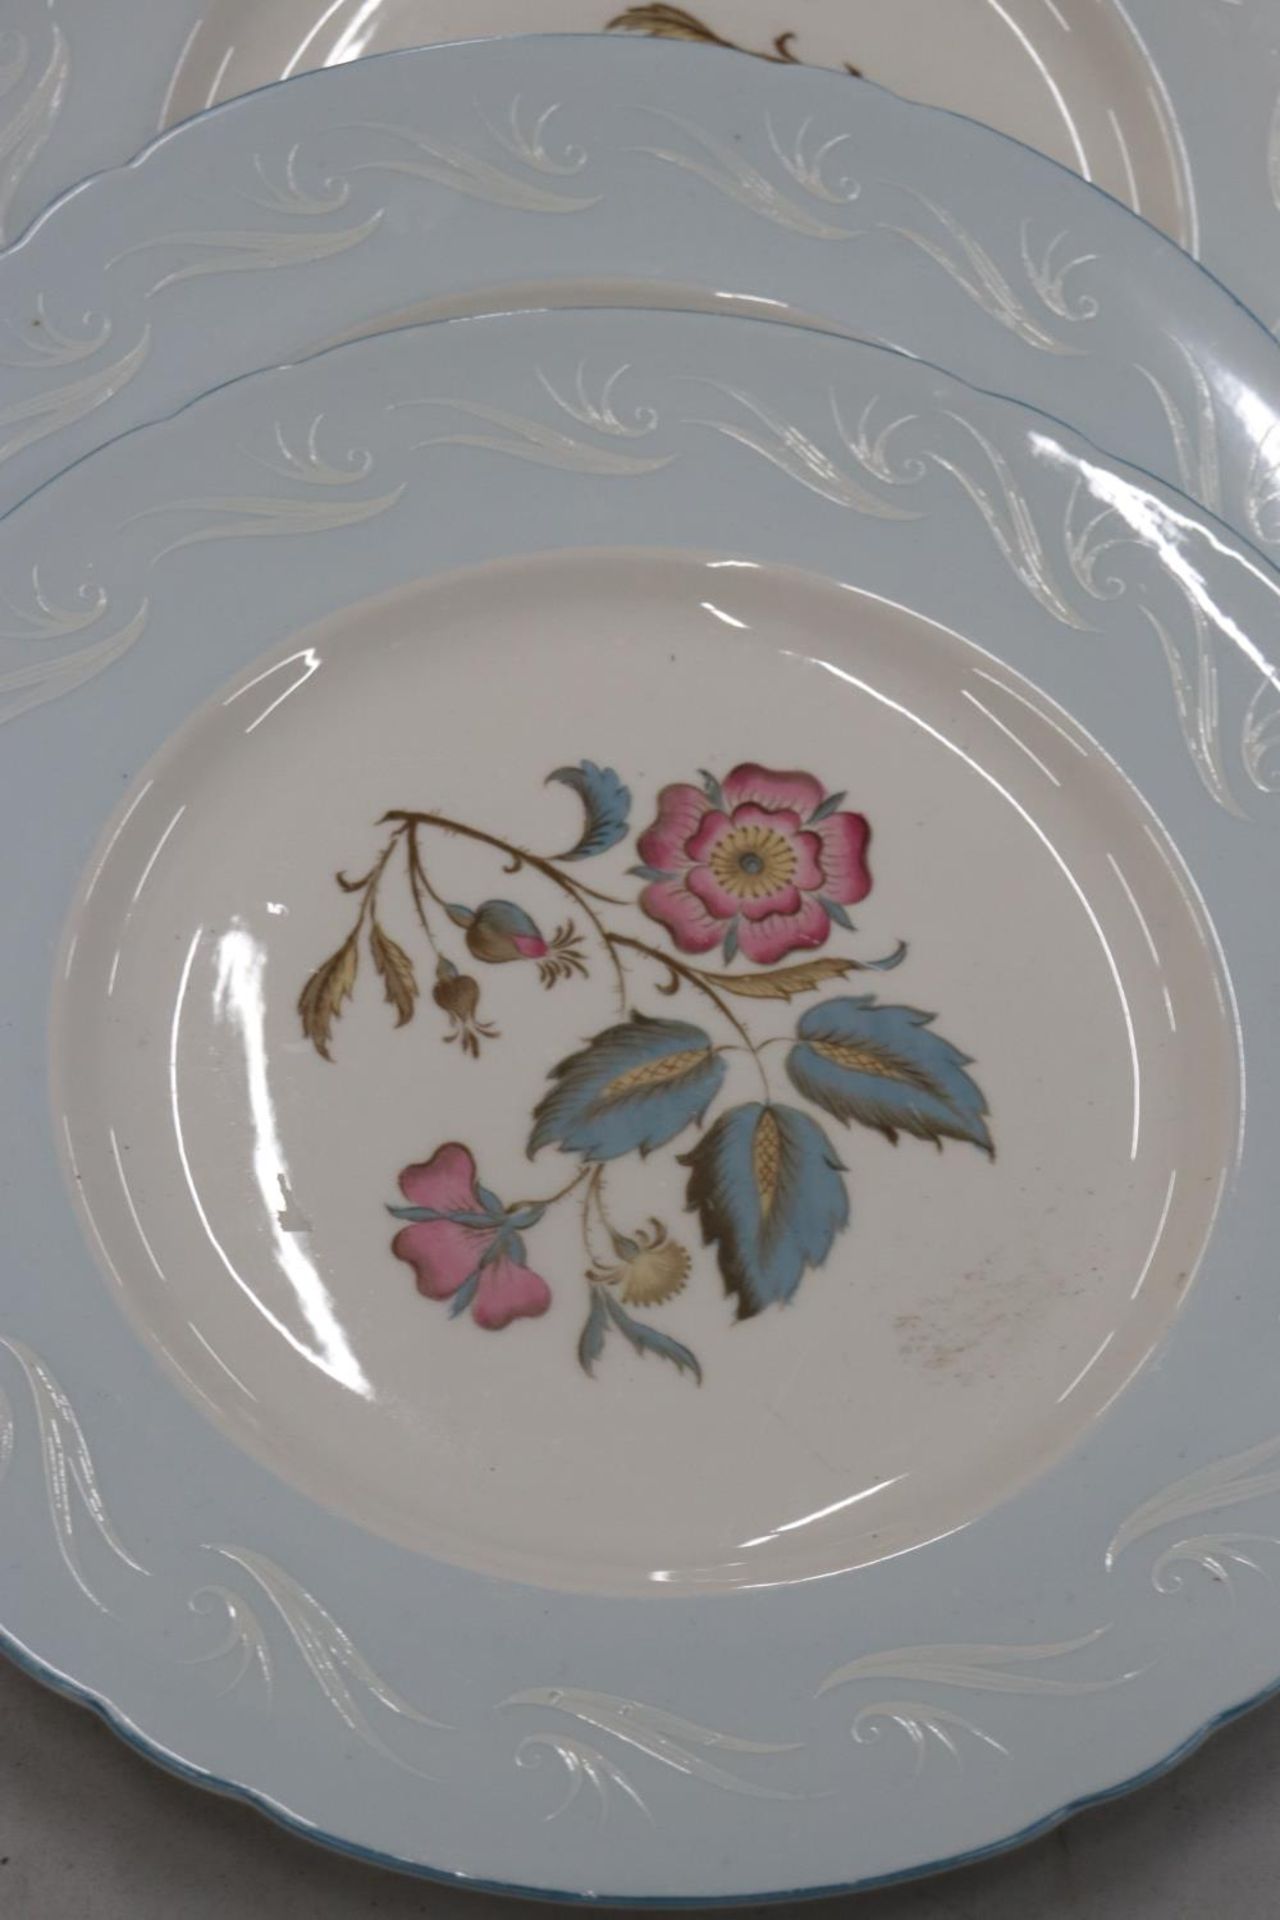 SIX SHELLEY FLORAL PLATES 27.5 CM - Image 2 of 5